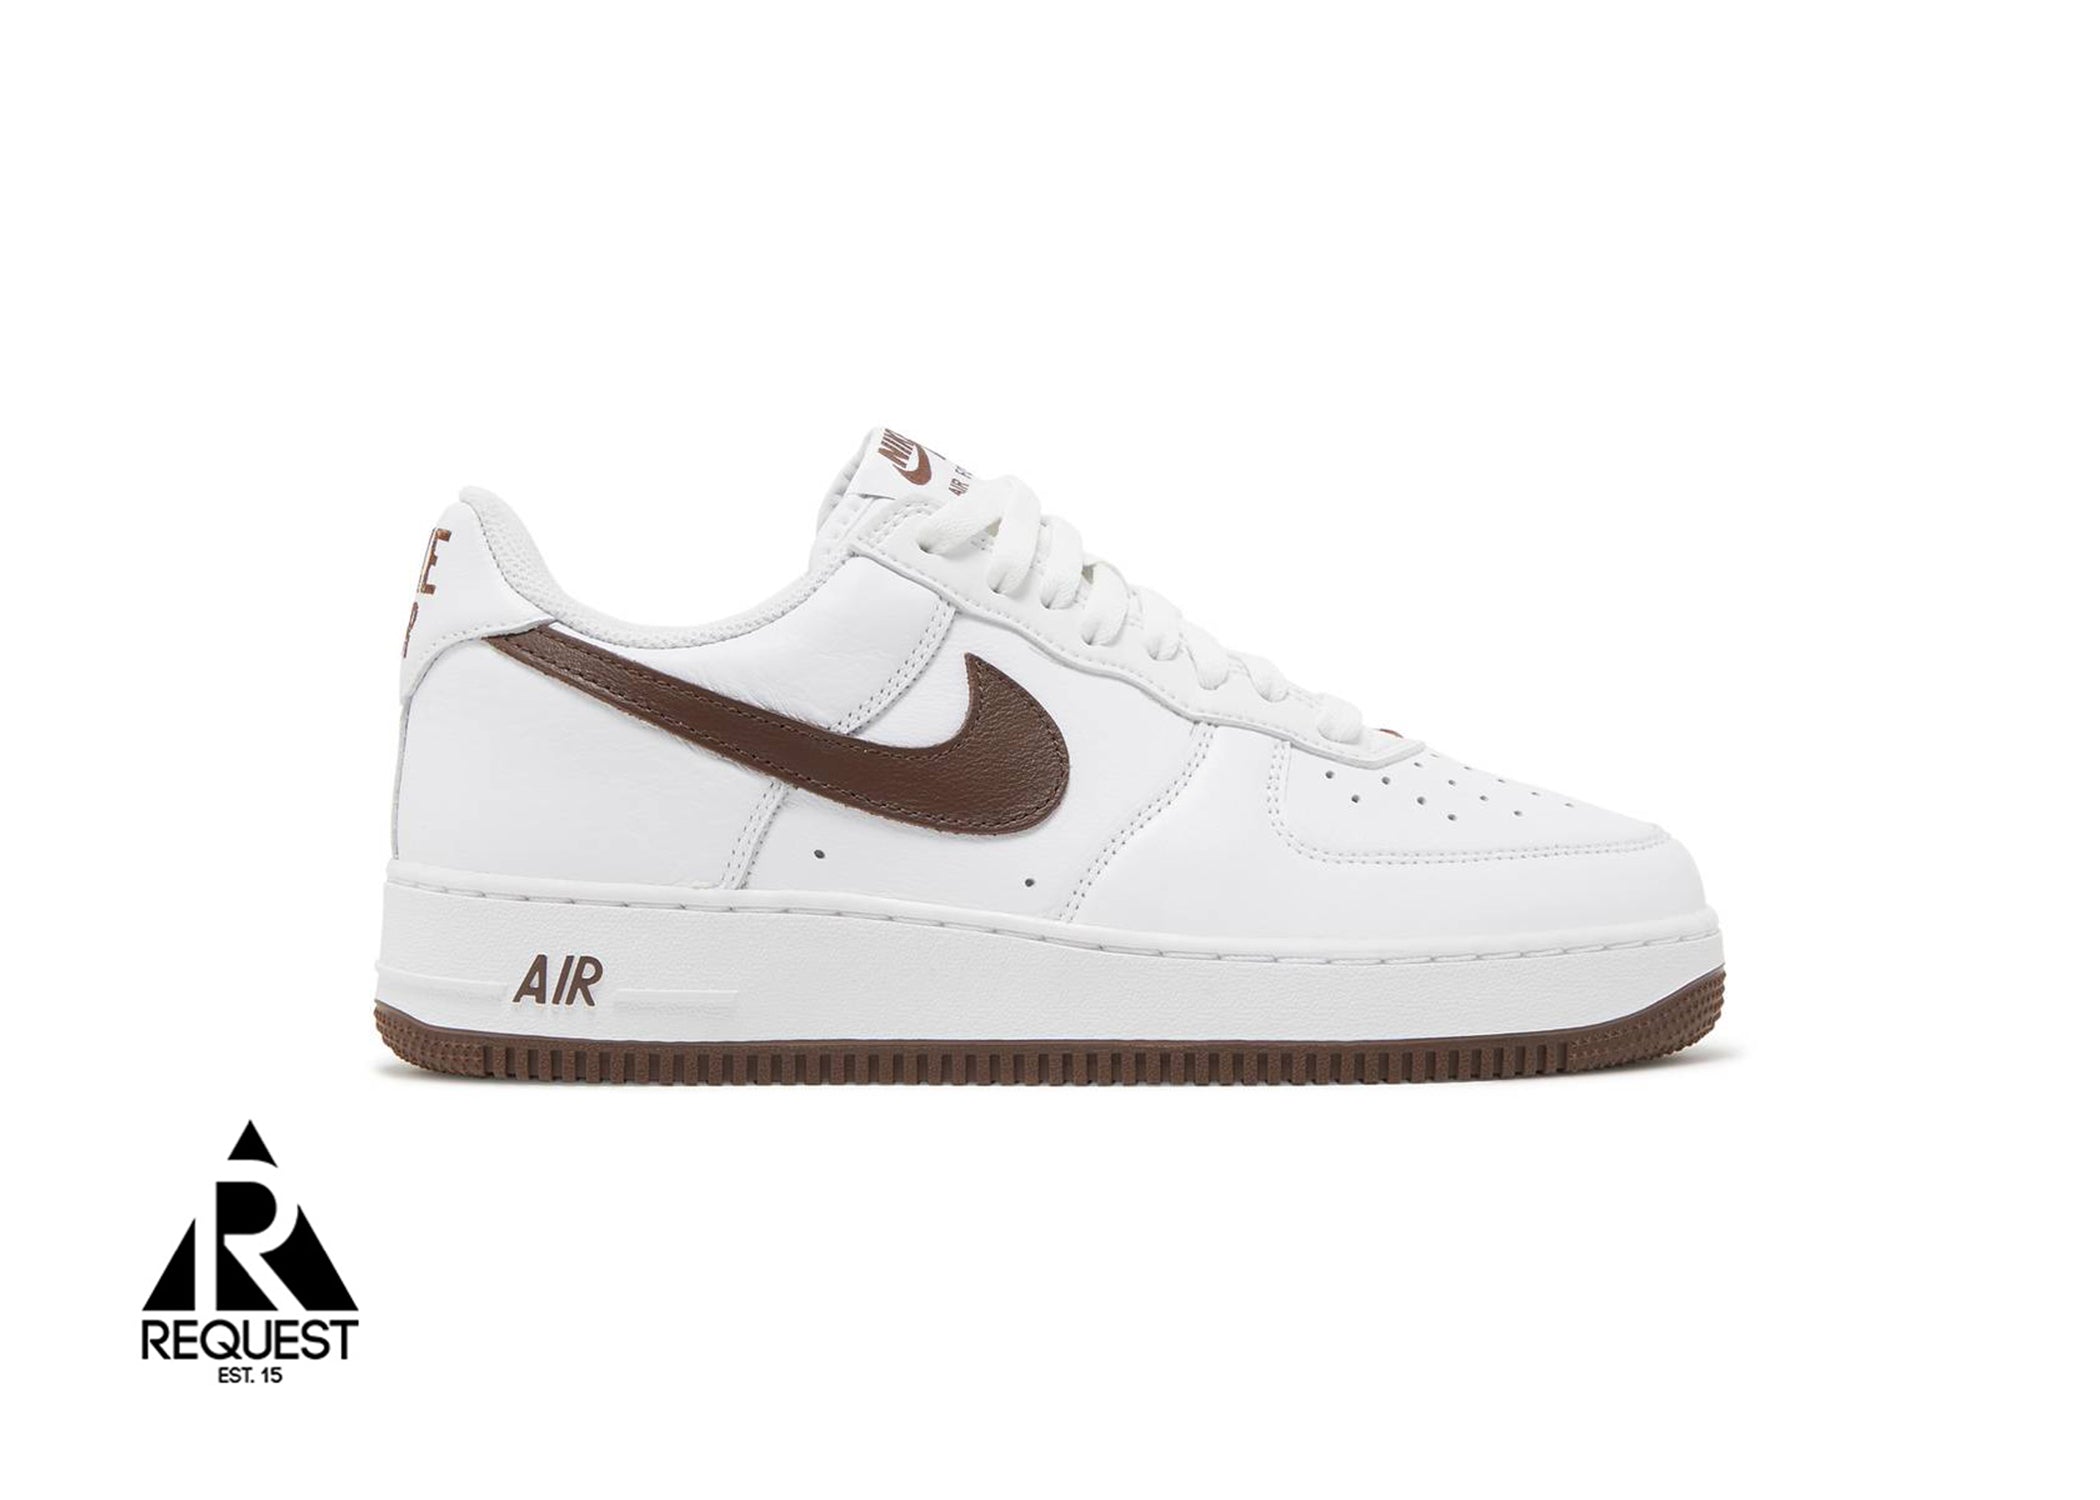 Nike Air Force 1 '07 Low "Color of the Month White Chocolate" (2022)